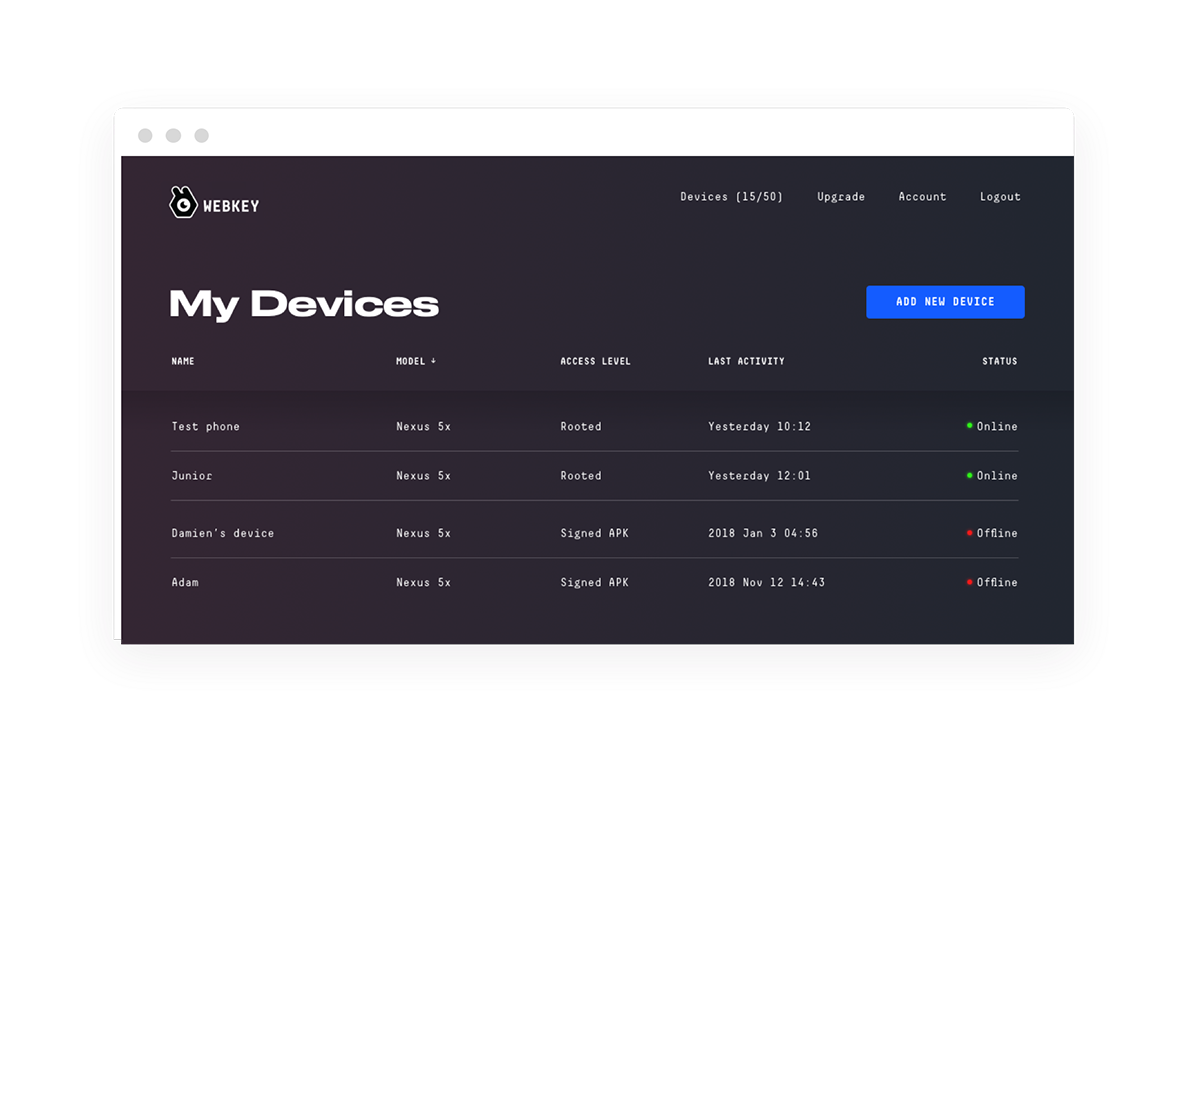 Webkey Full remote control for multiple devices